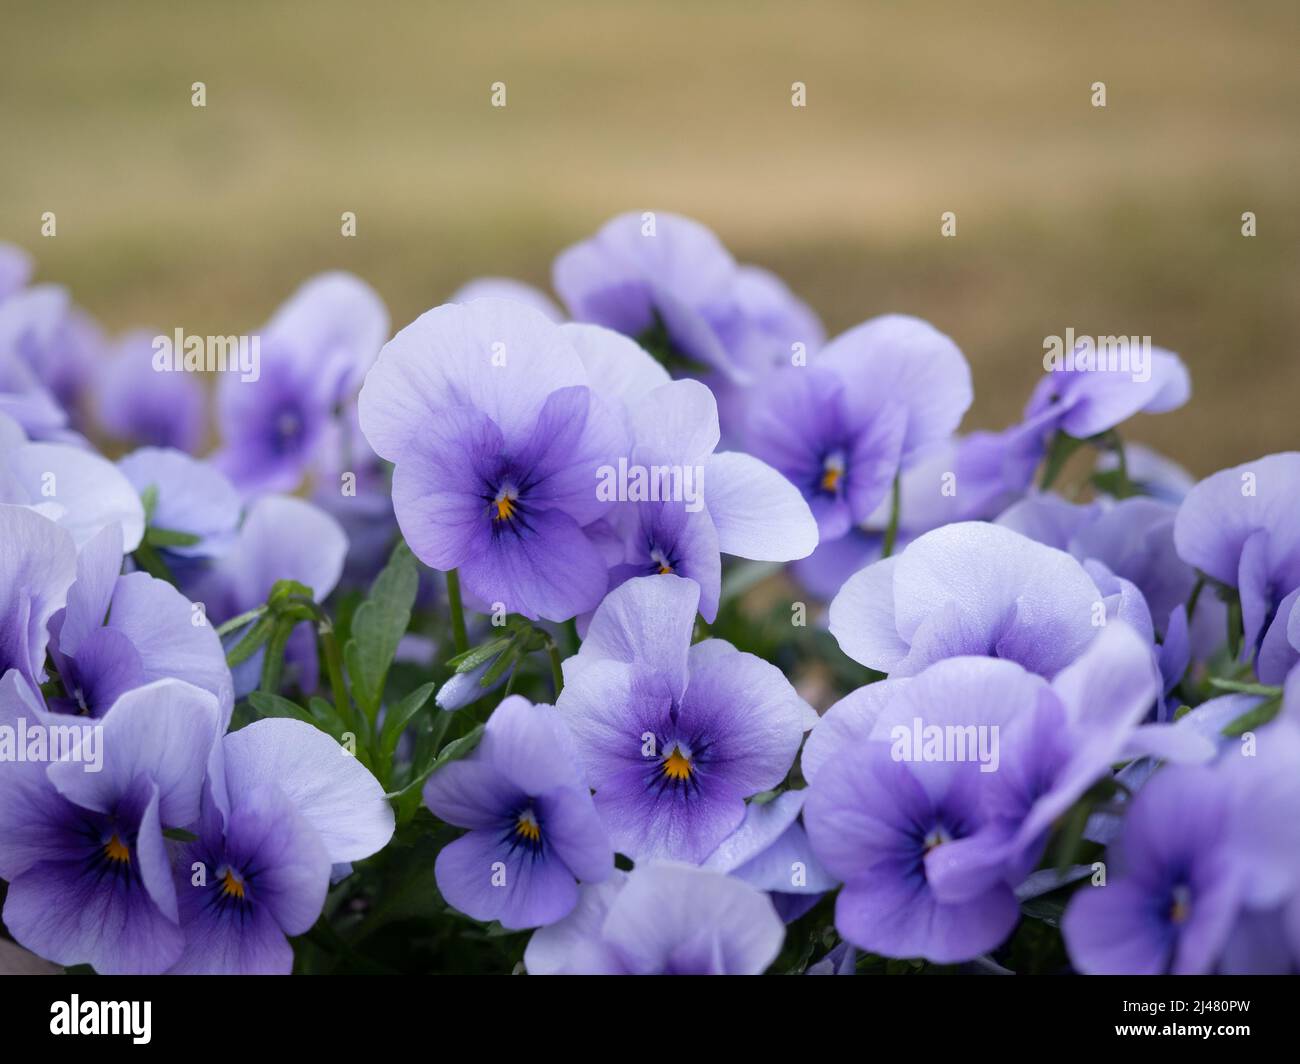 Ornamental purple flowers with yellow pollen with grass in the background. Stock Photo